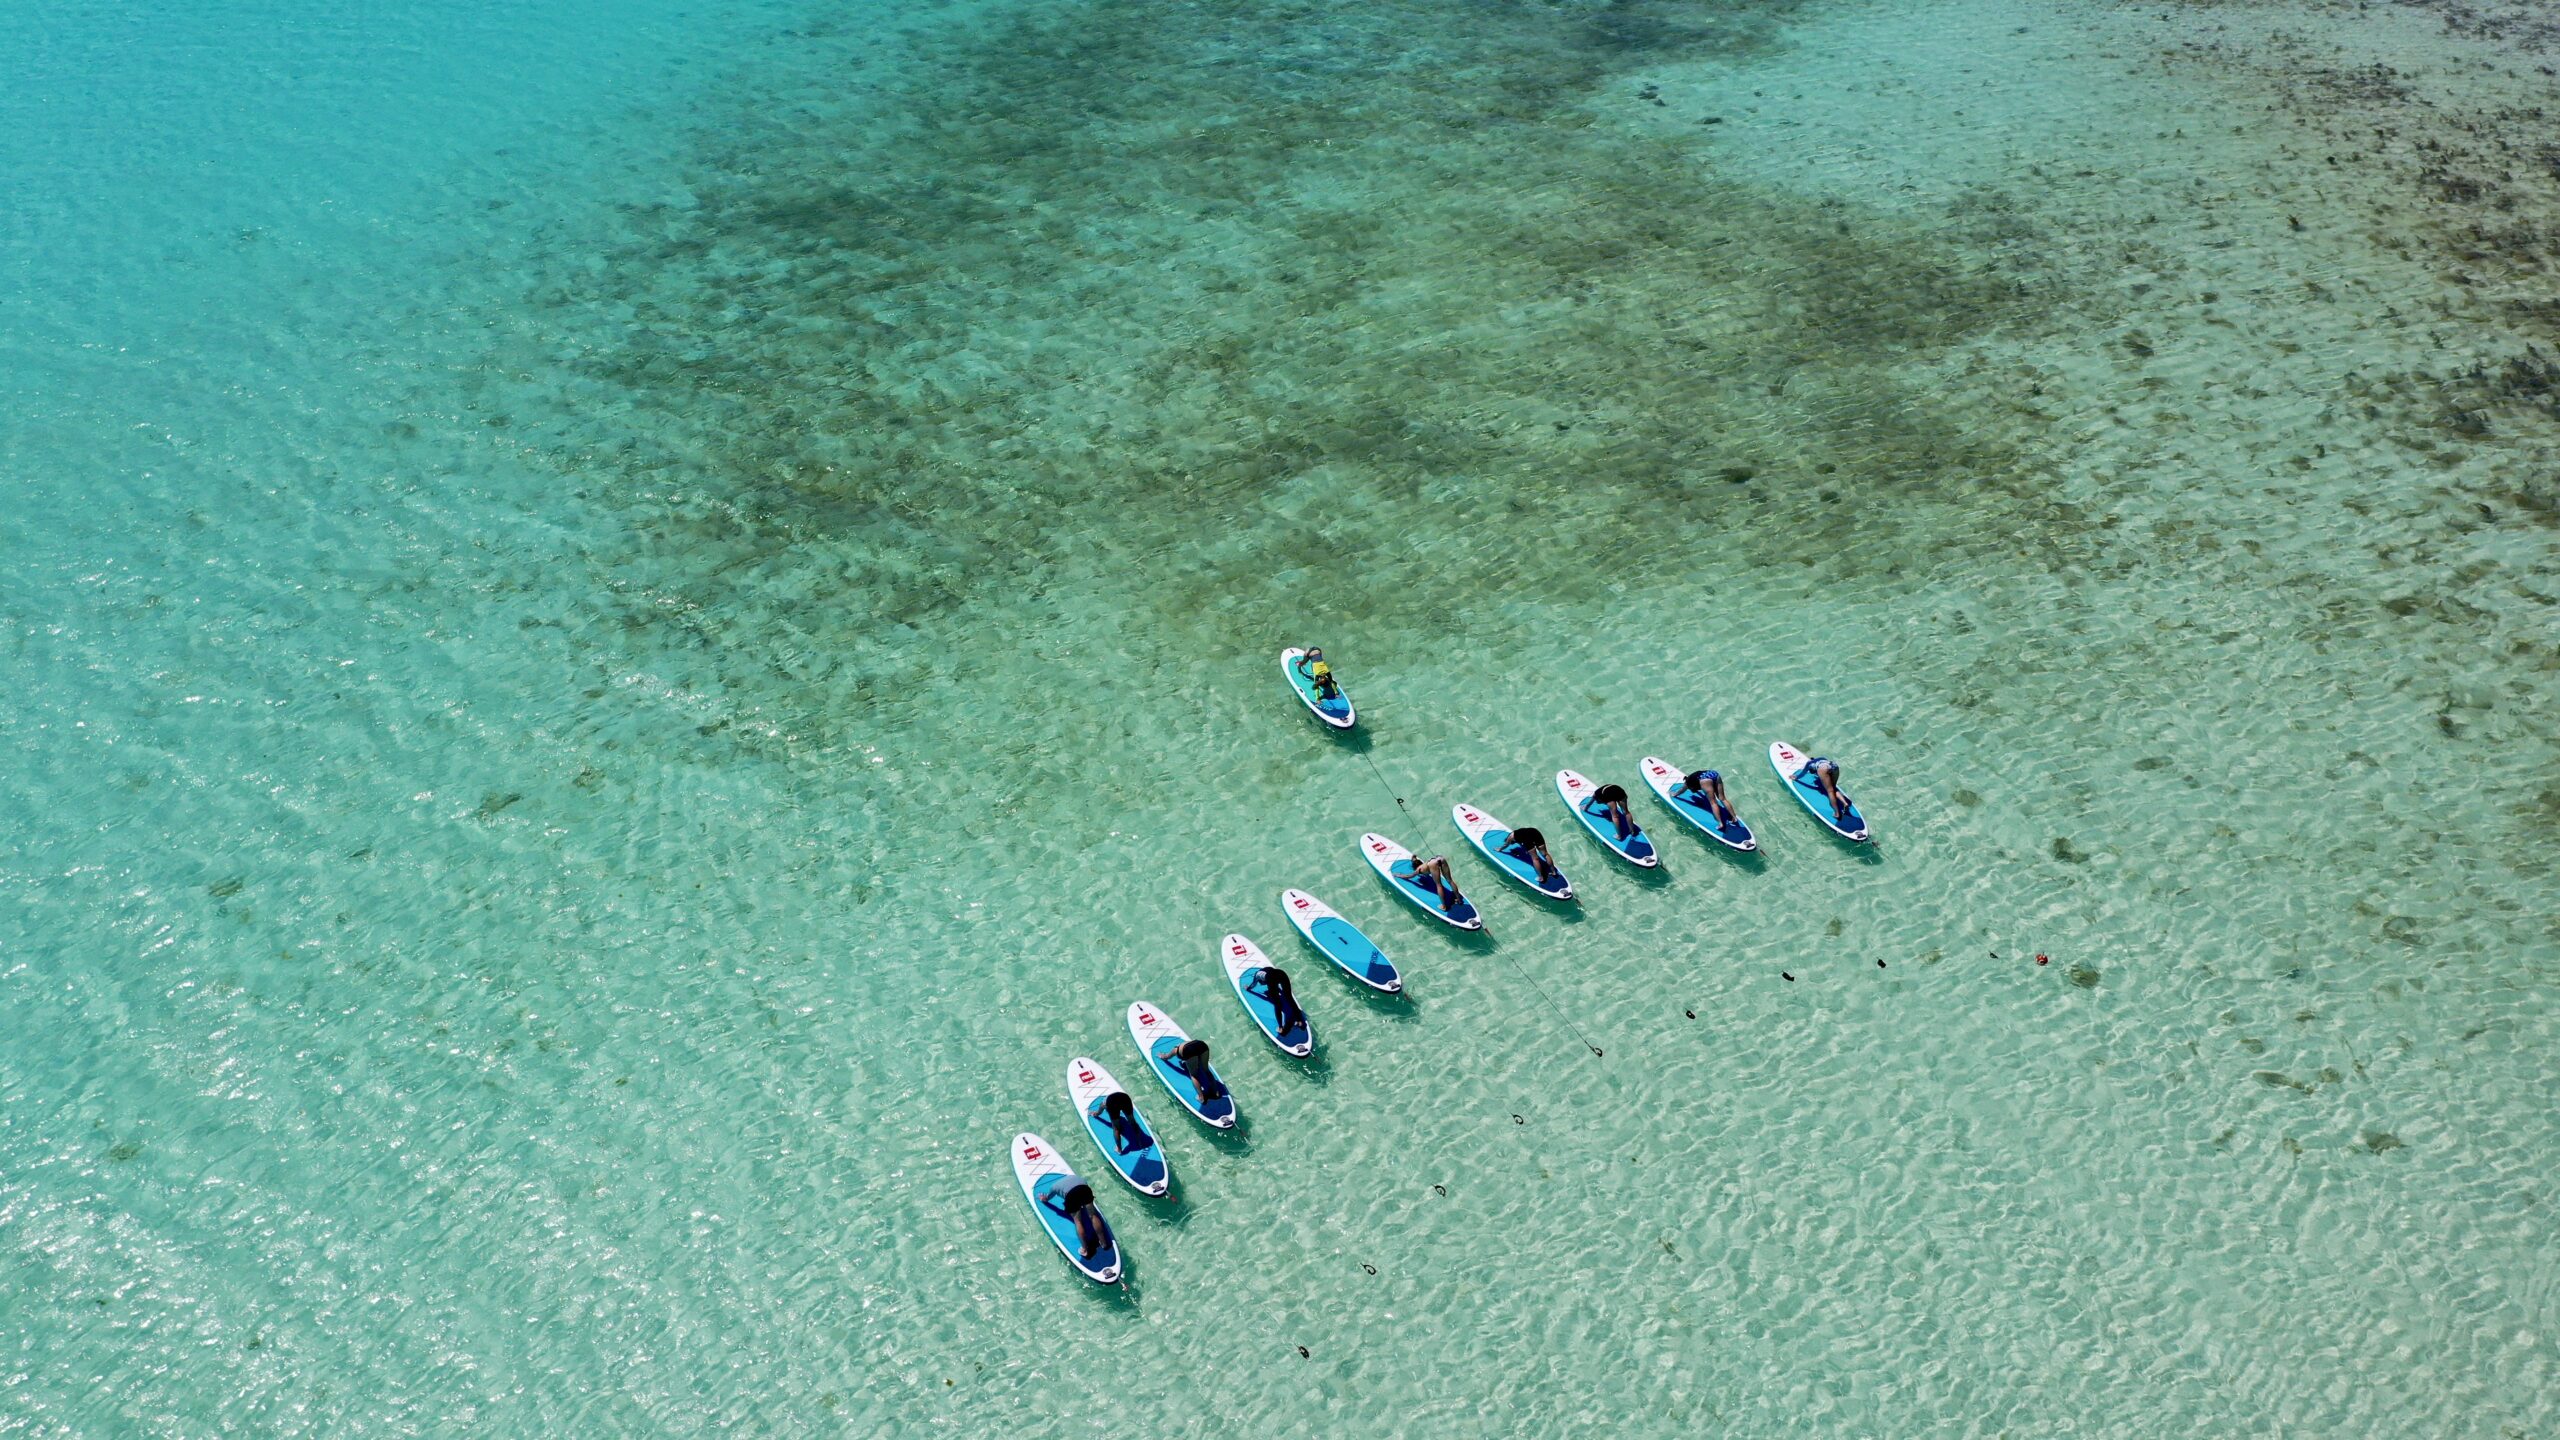 SUP Yoga at the Abrolhos Islands with Geraldton Paddle & Yoga